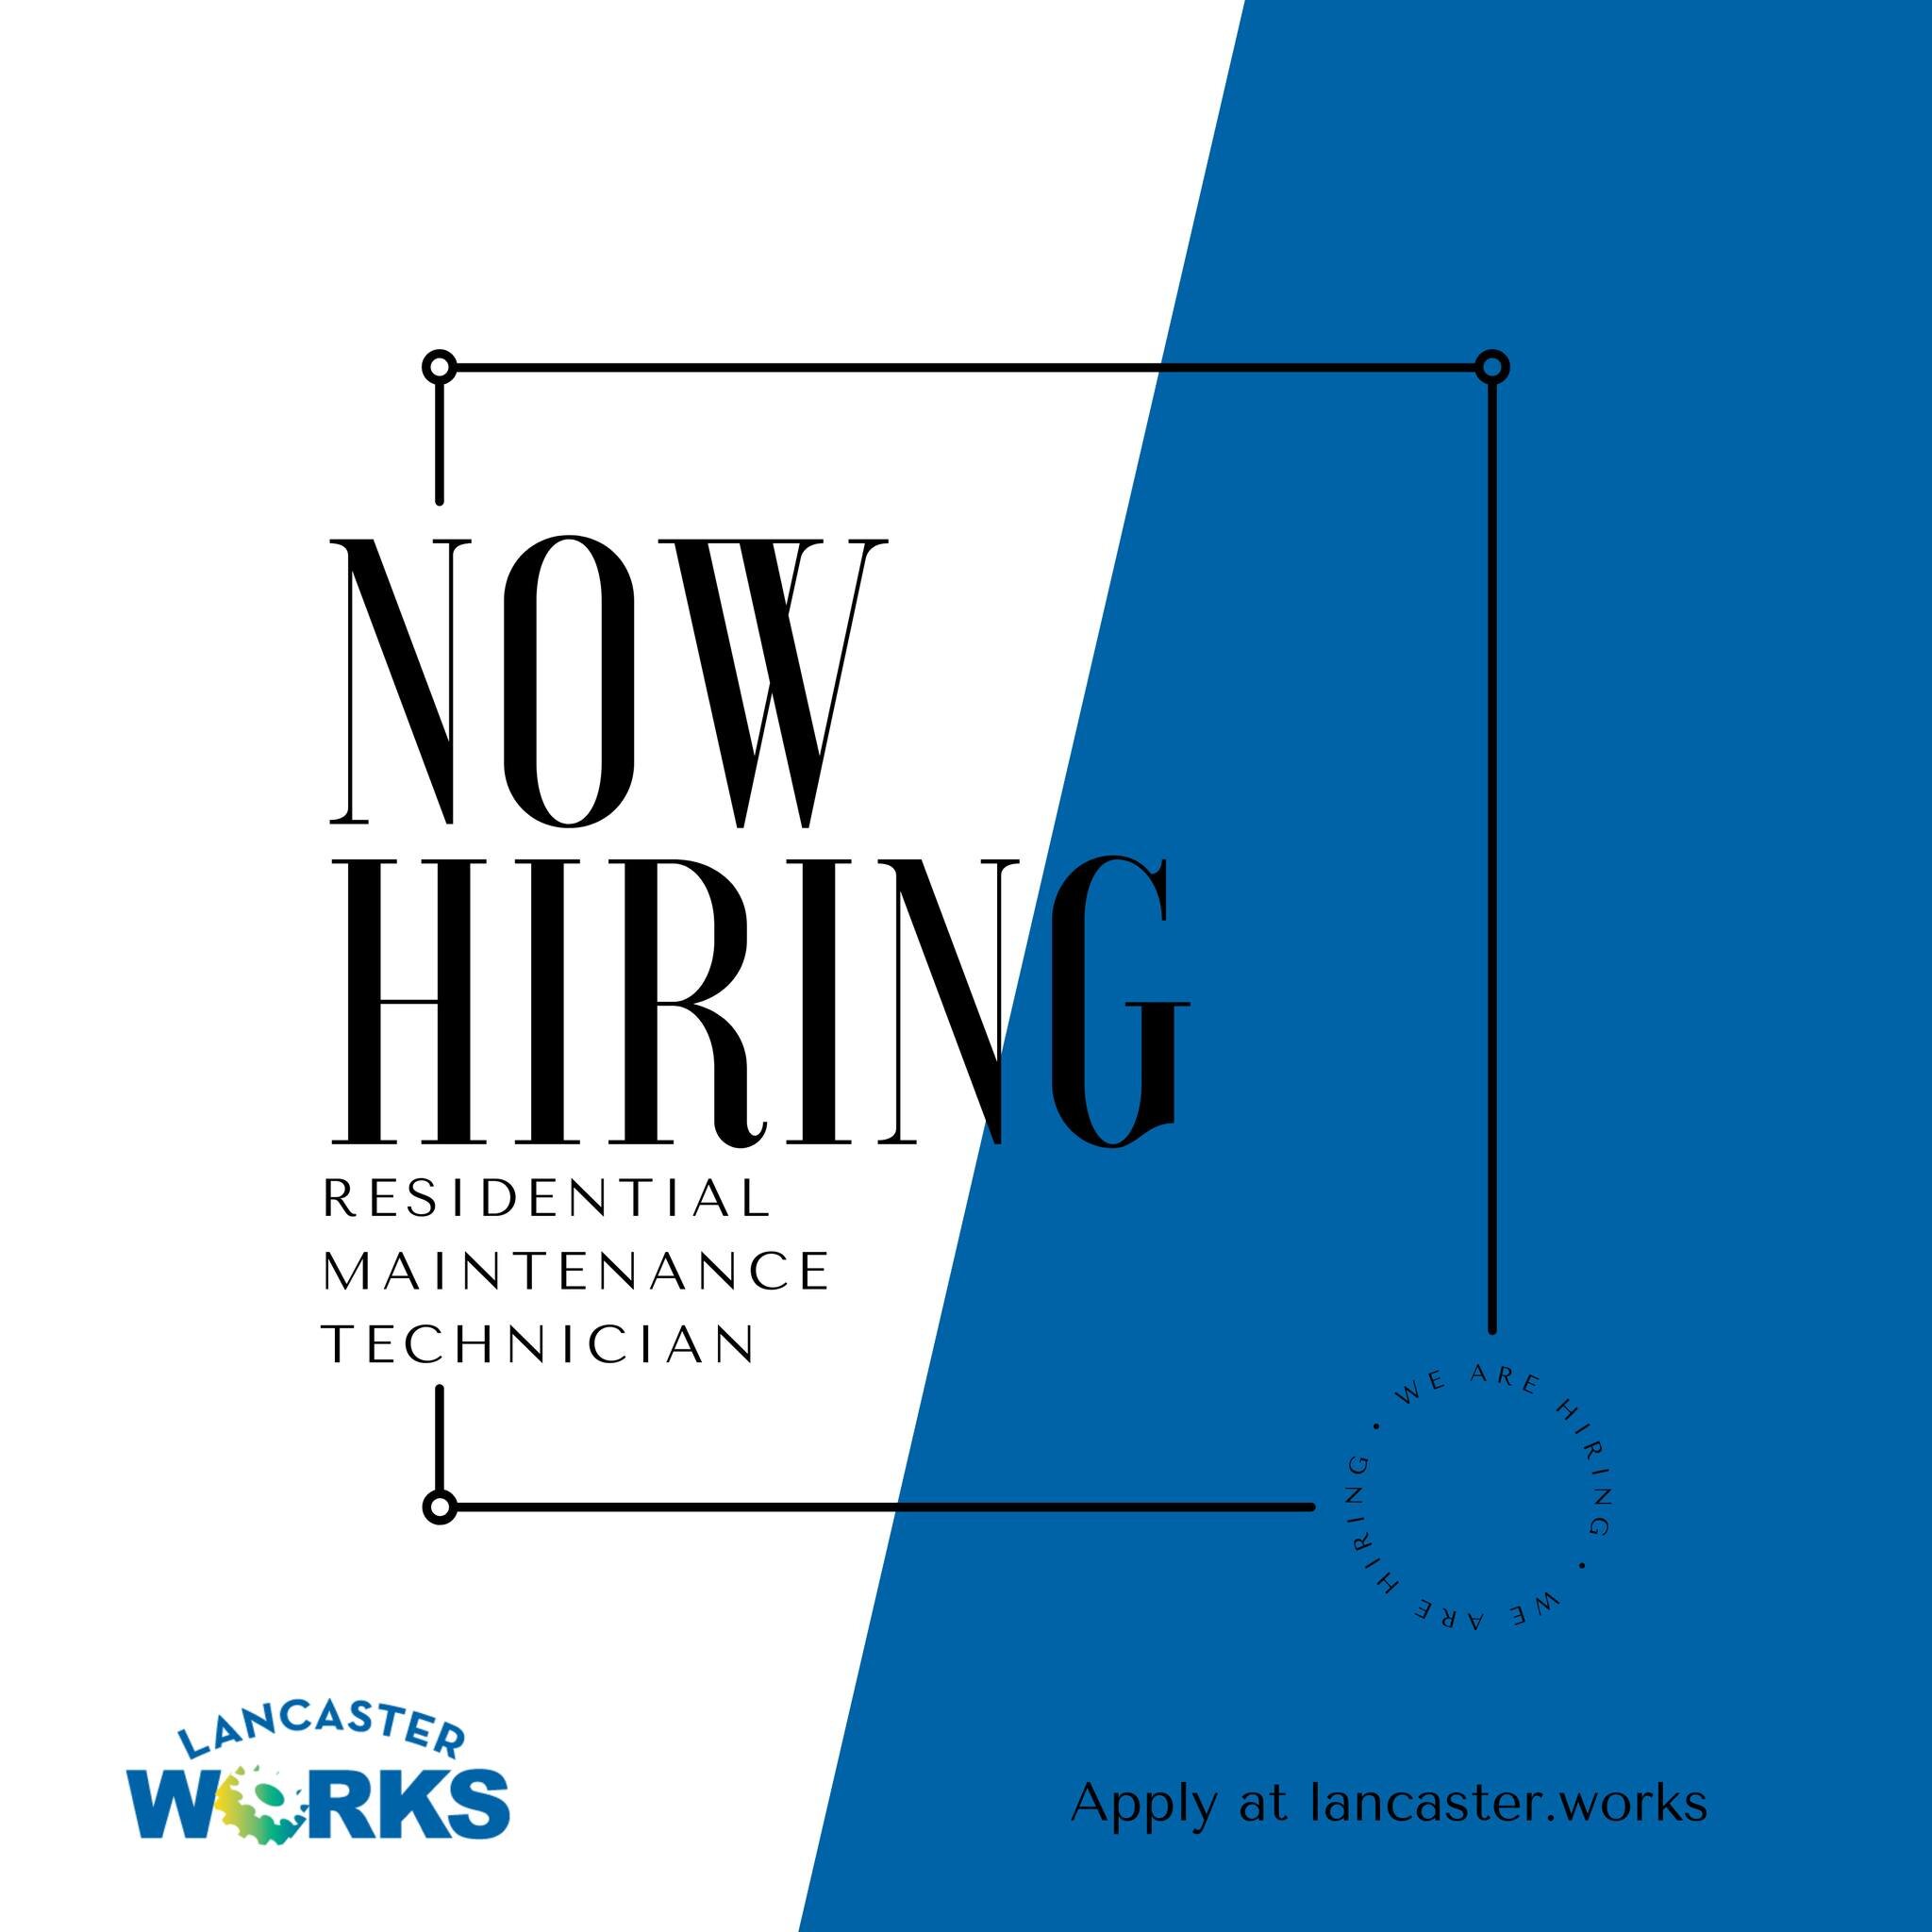 We have jobs!

Now Hiring Residential Maintenance Technician in Landisville, PA.

Apply on our website today.